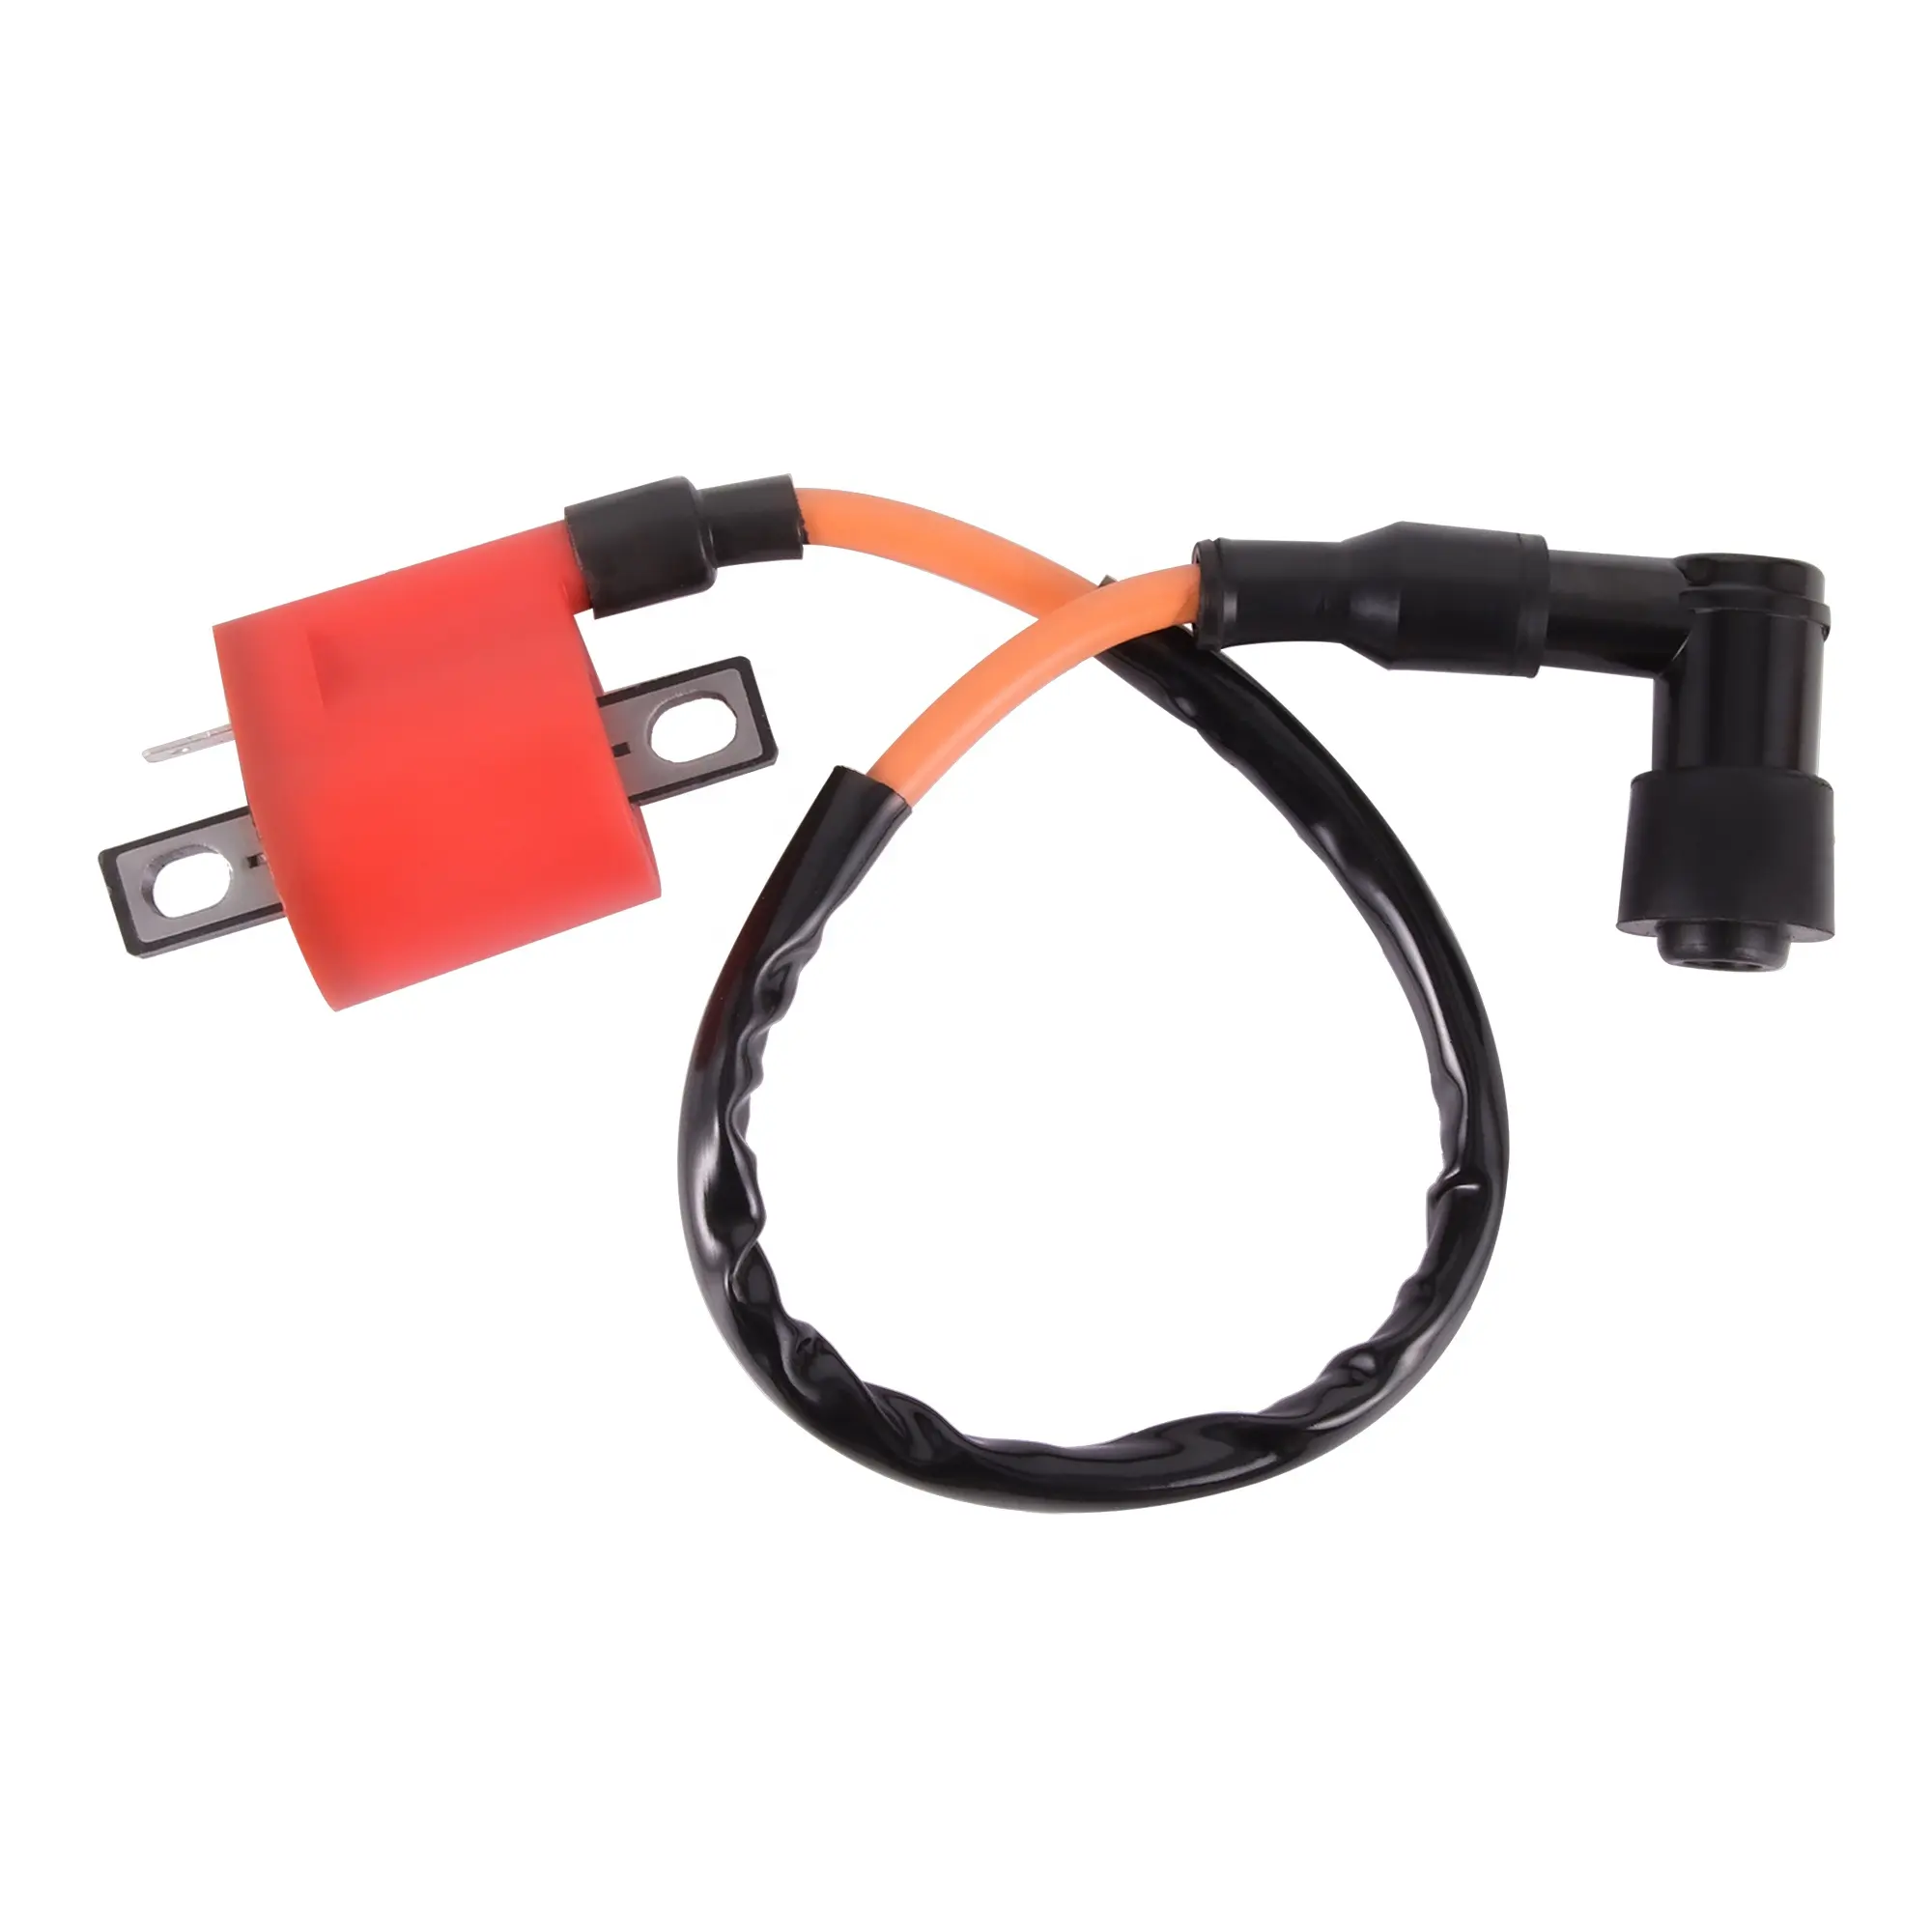 GOOFIT High Performance Motorcycle Ignition Coil For CG Vertical Engine 125cc 150cc 200cc 250cc ATV Off Road Vehicle Go Kart